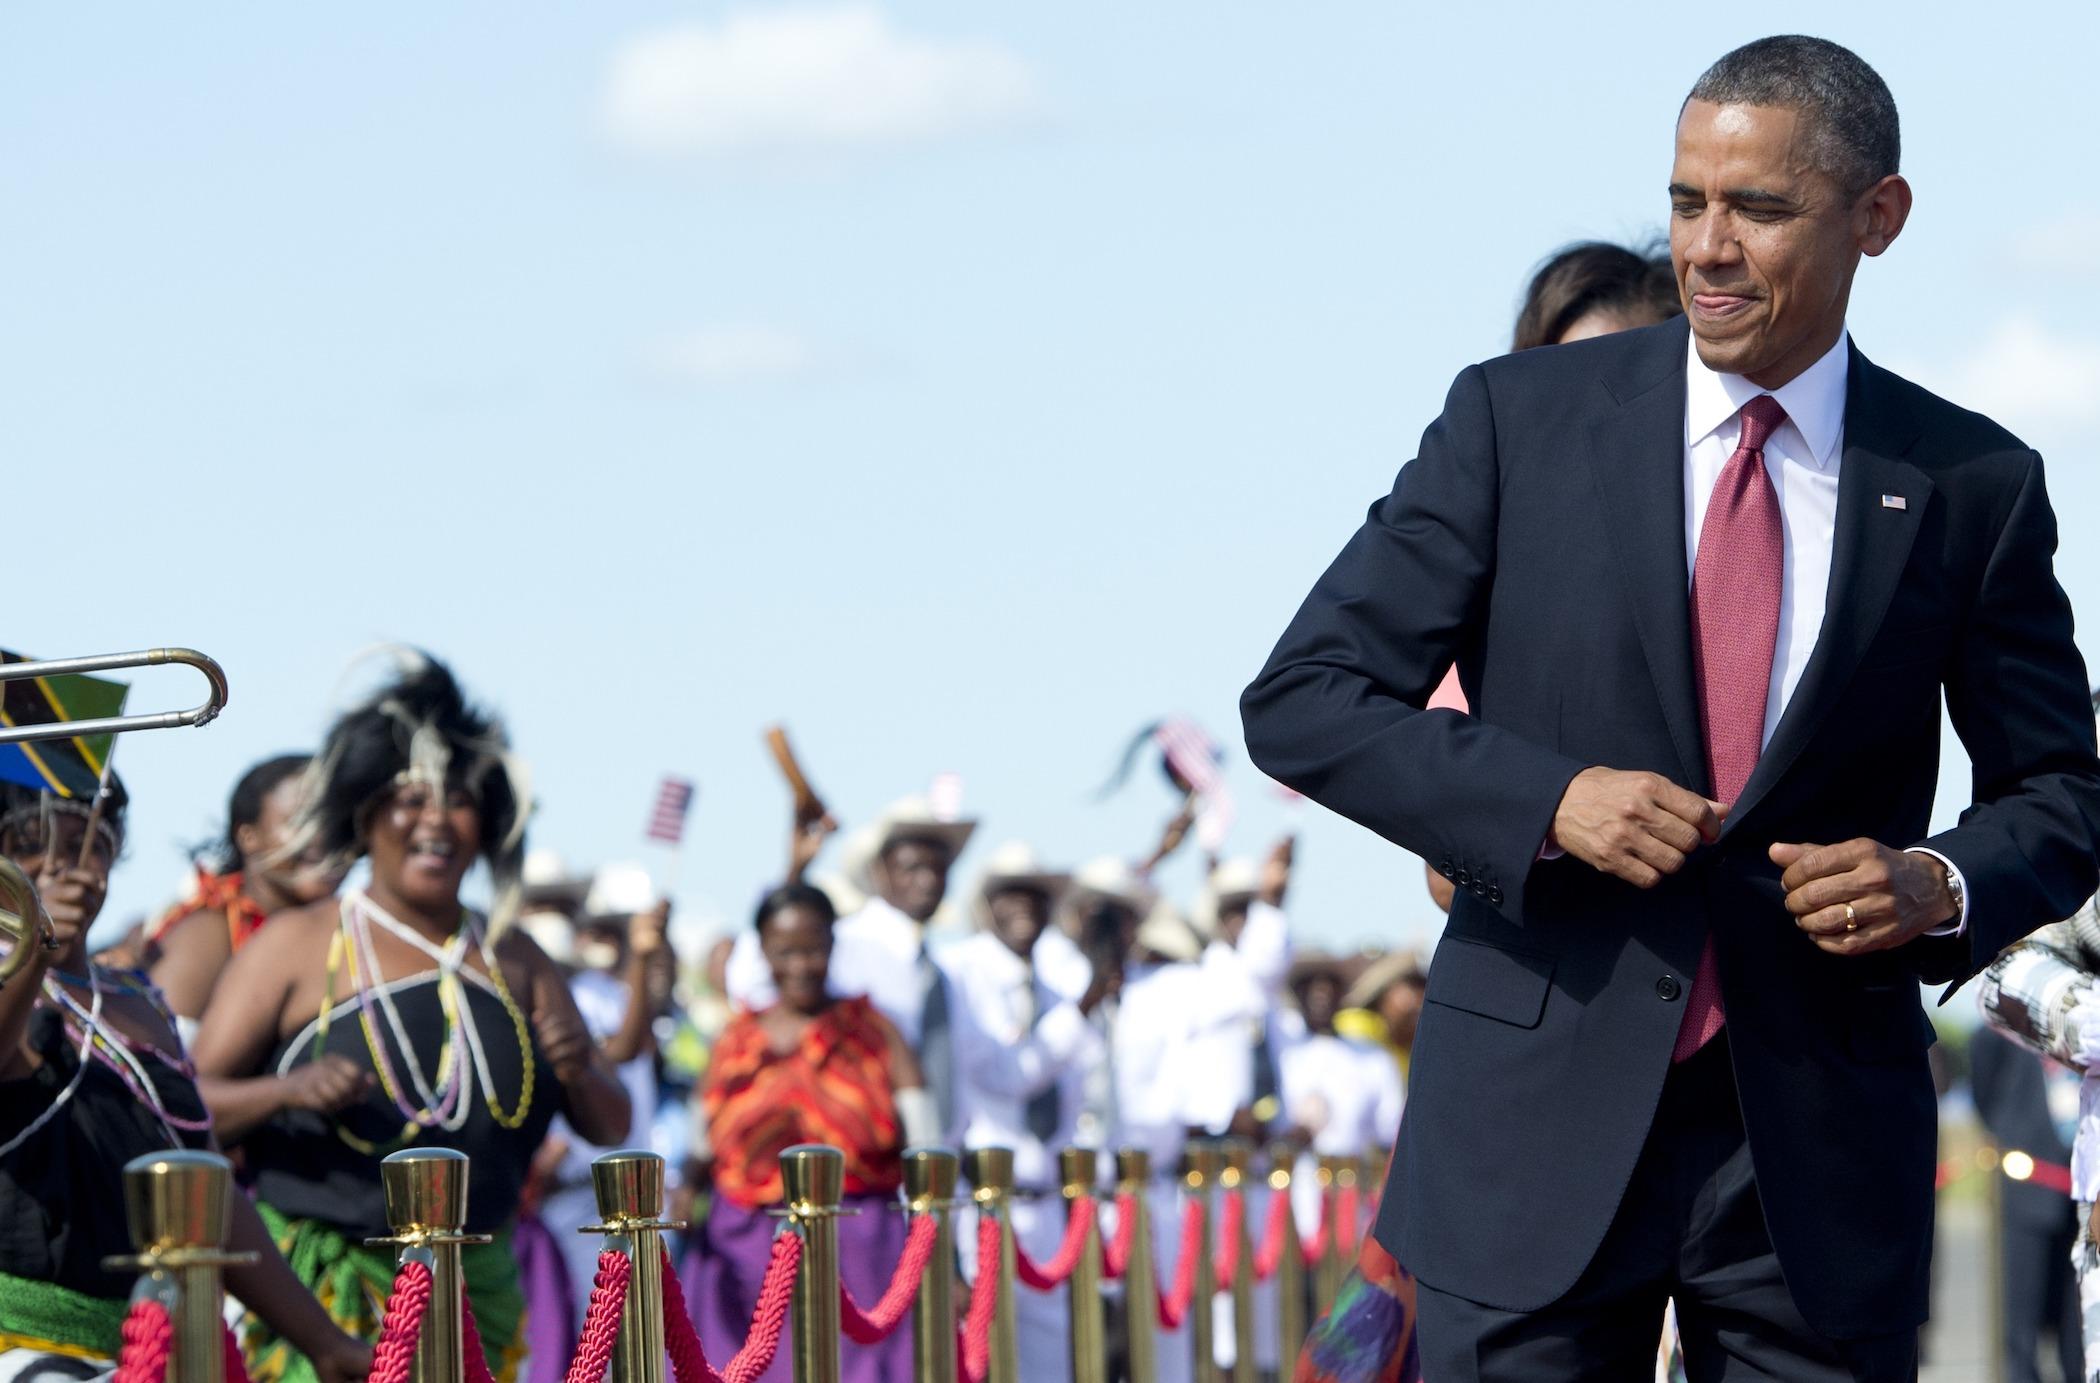 President Barack Obama dances to music upon arrival on Air Force One at Julius Nyerere International Airport in Dar Es Salaam, Tanzania, on July 1, 2013.